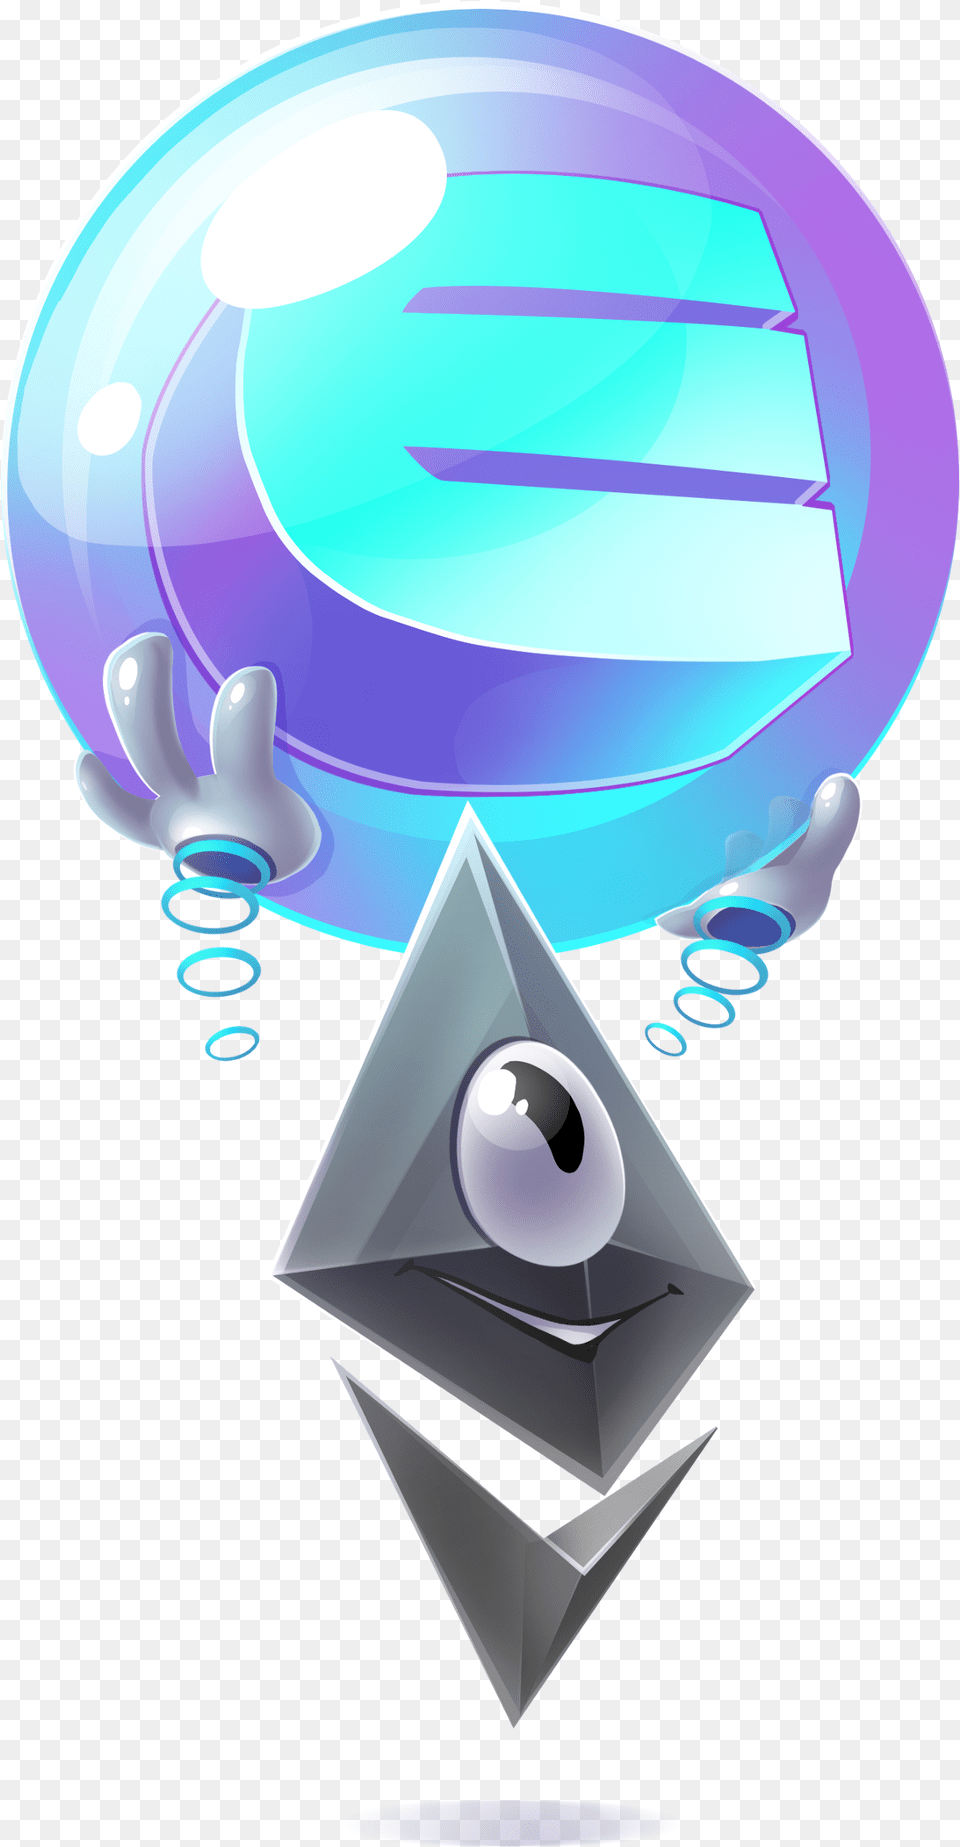 Triangle, Sphere, Balloon, Disk Free Transparent Png